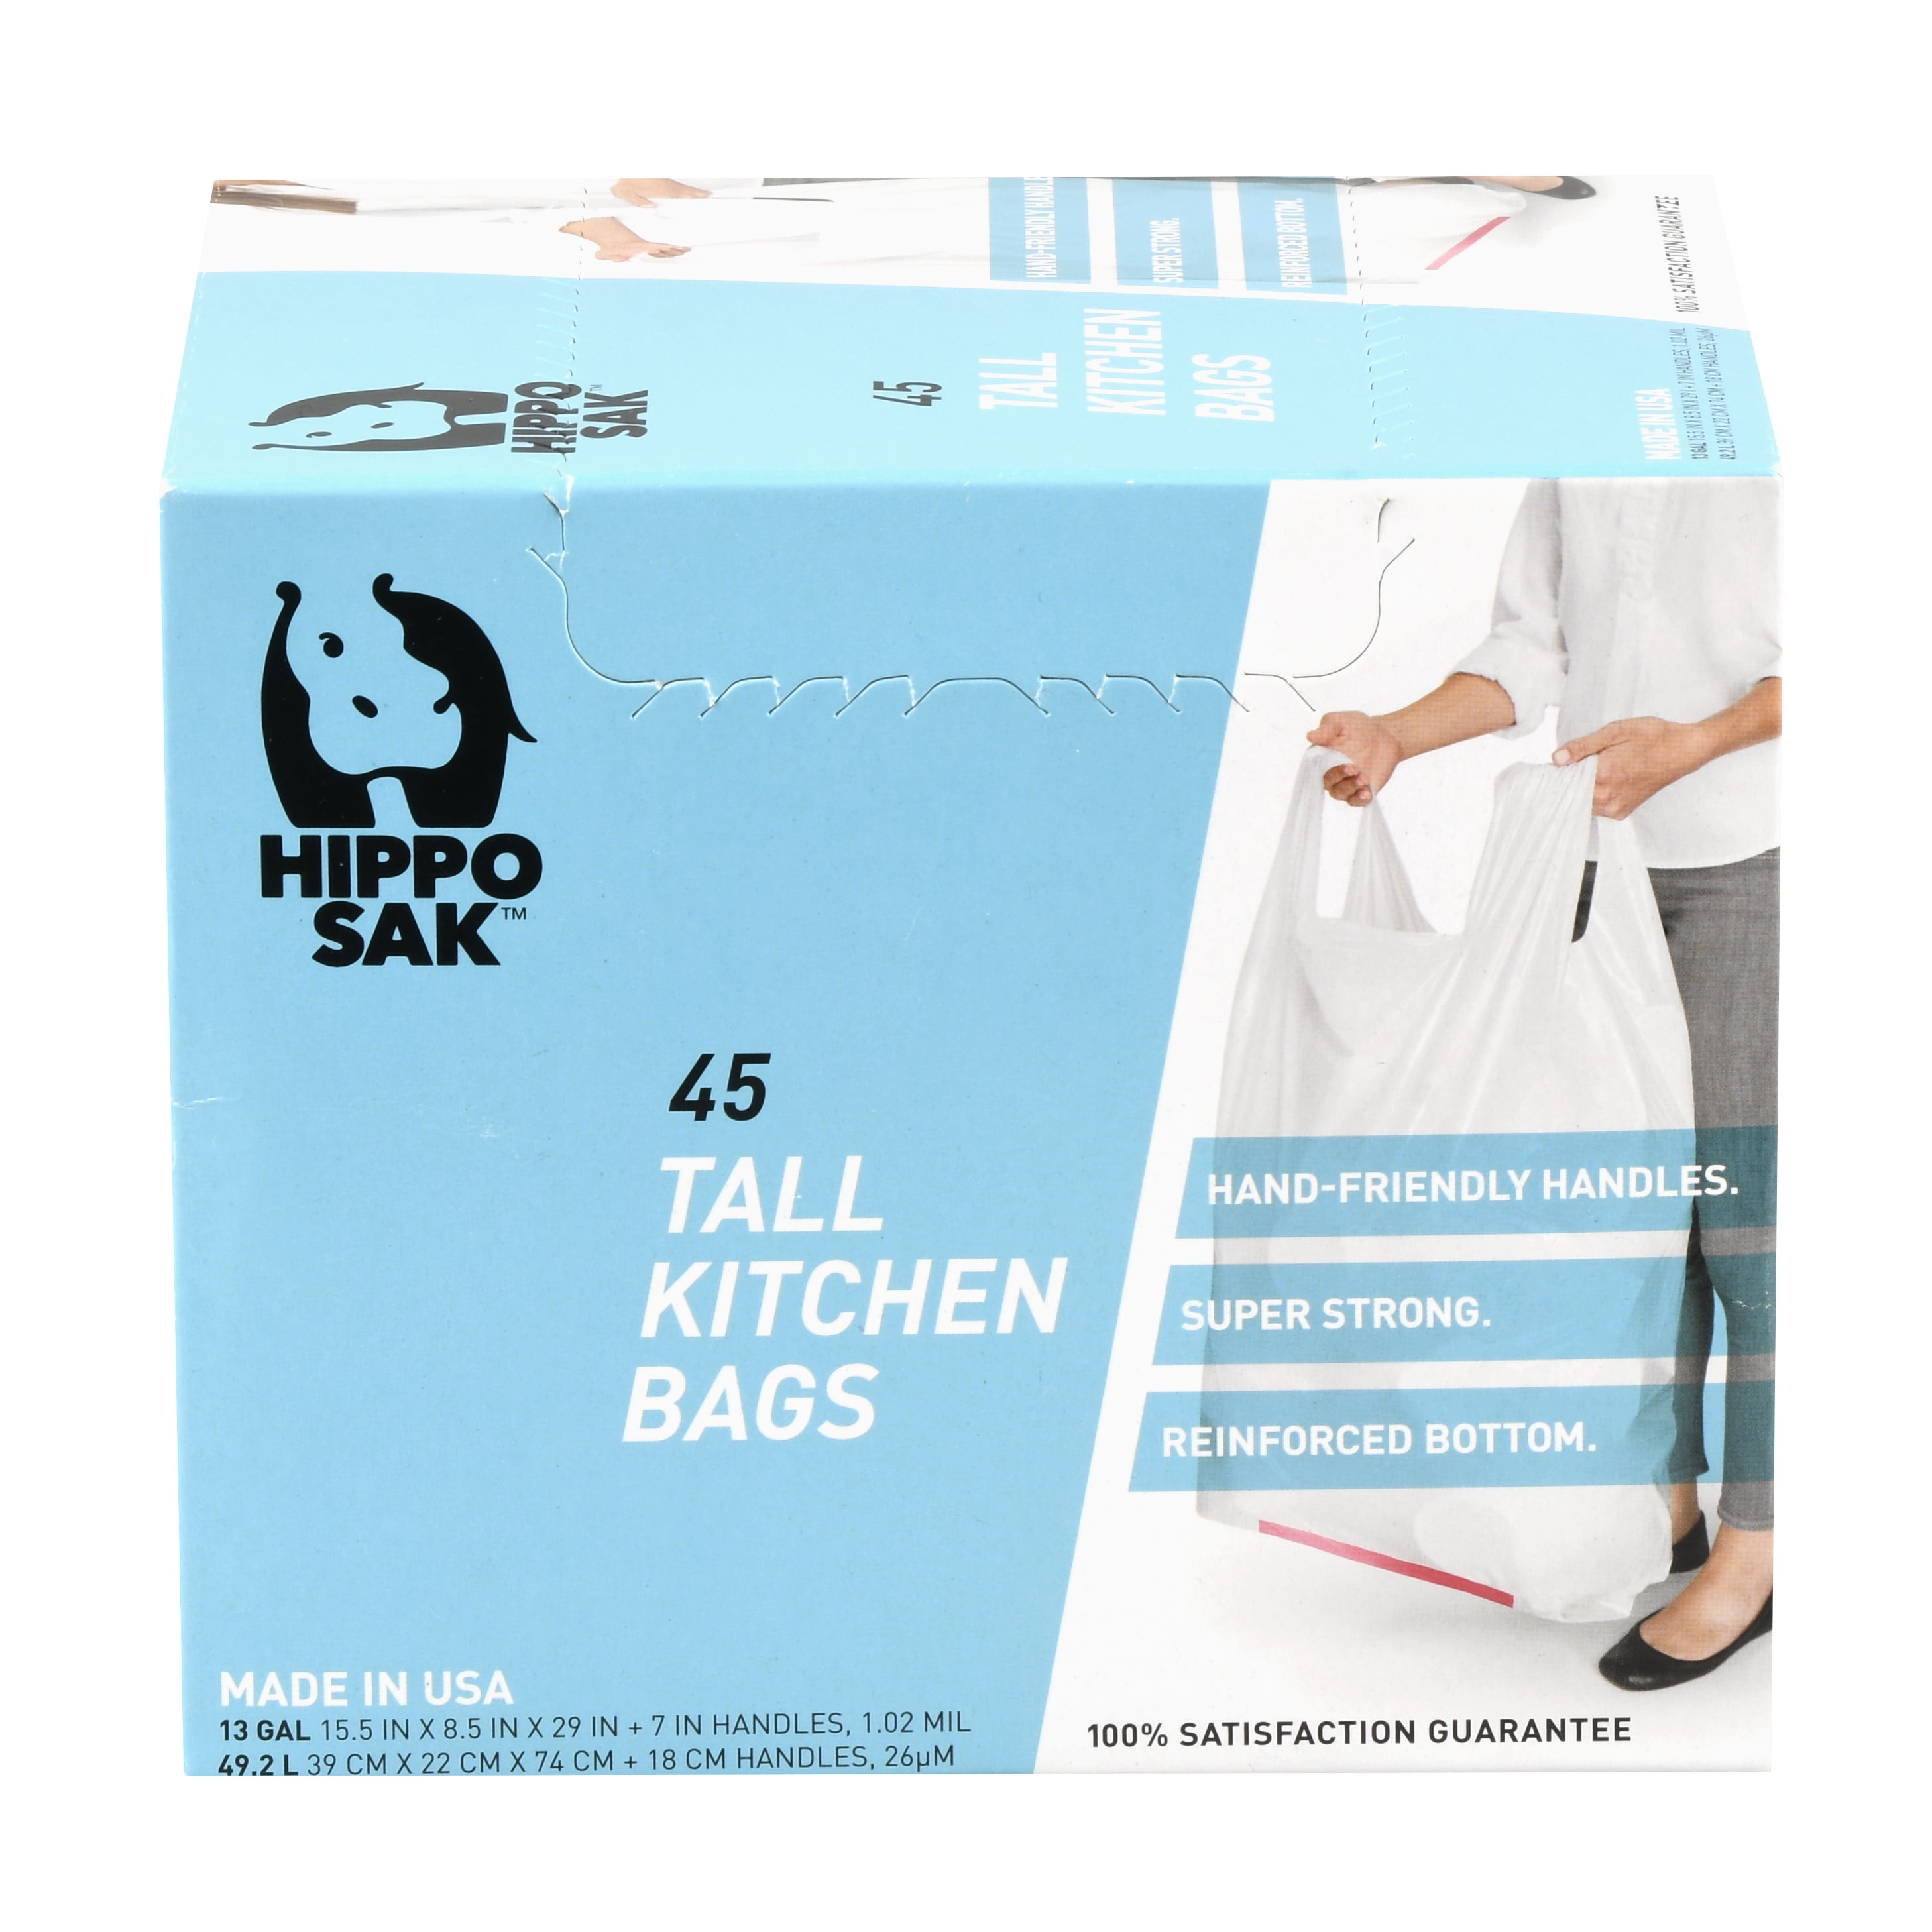 Hippo Sak Daily's Storage and Disposal Bags with Dispenser (225